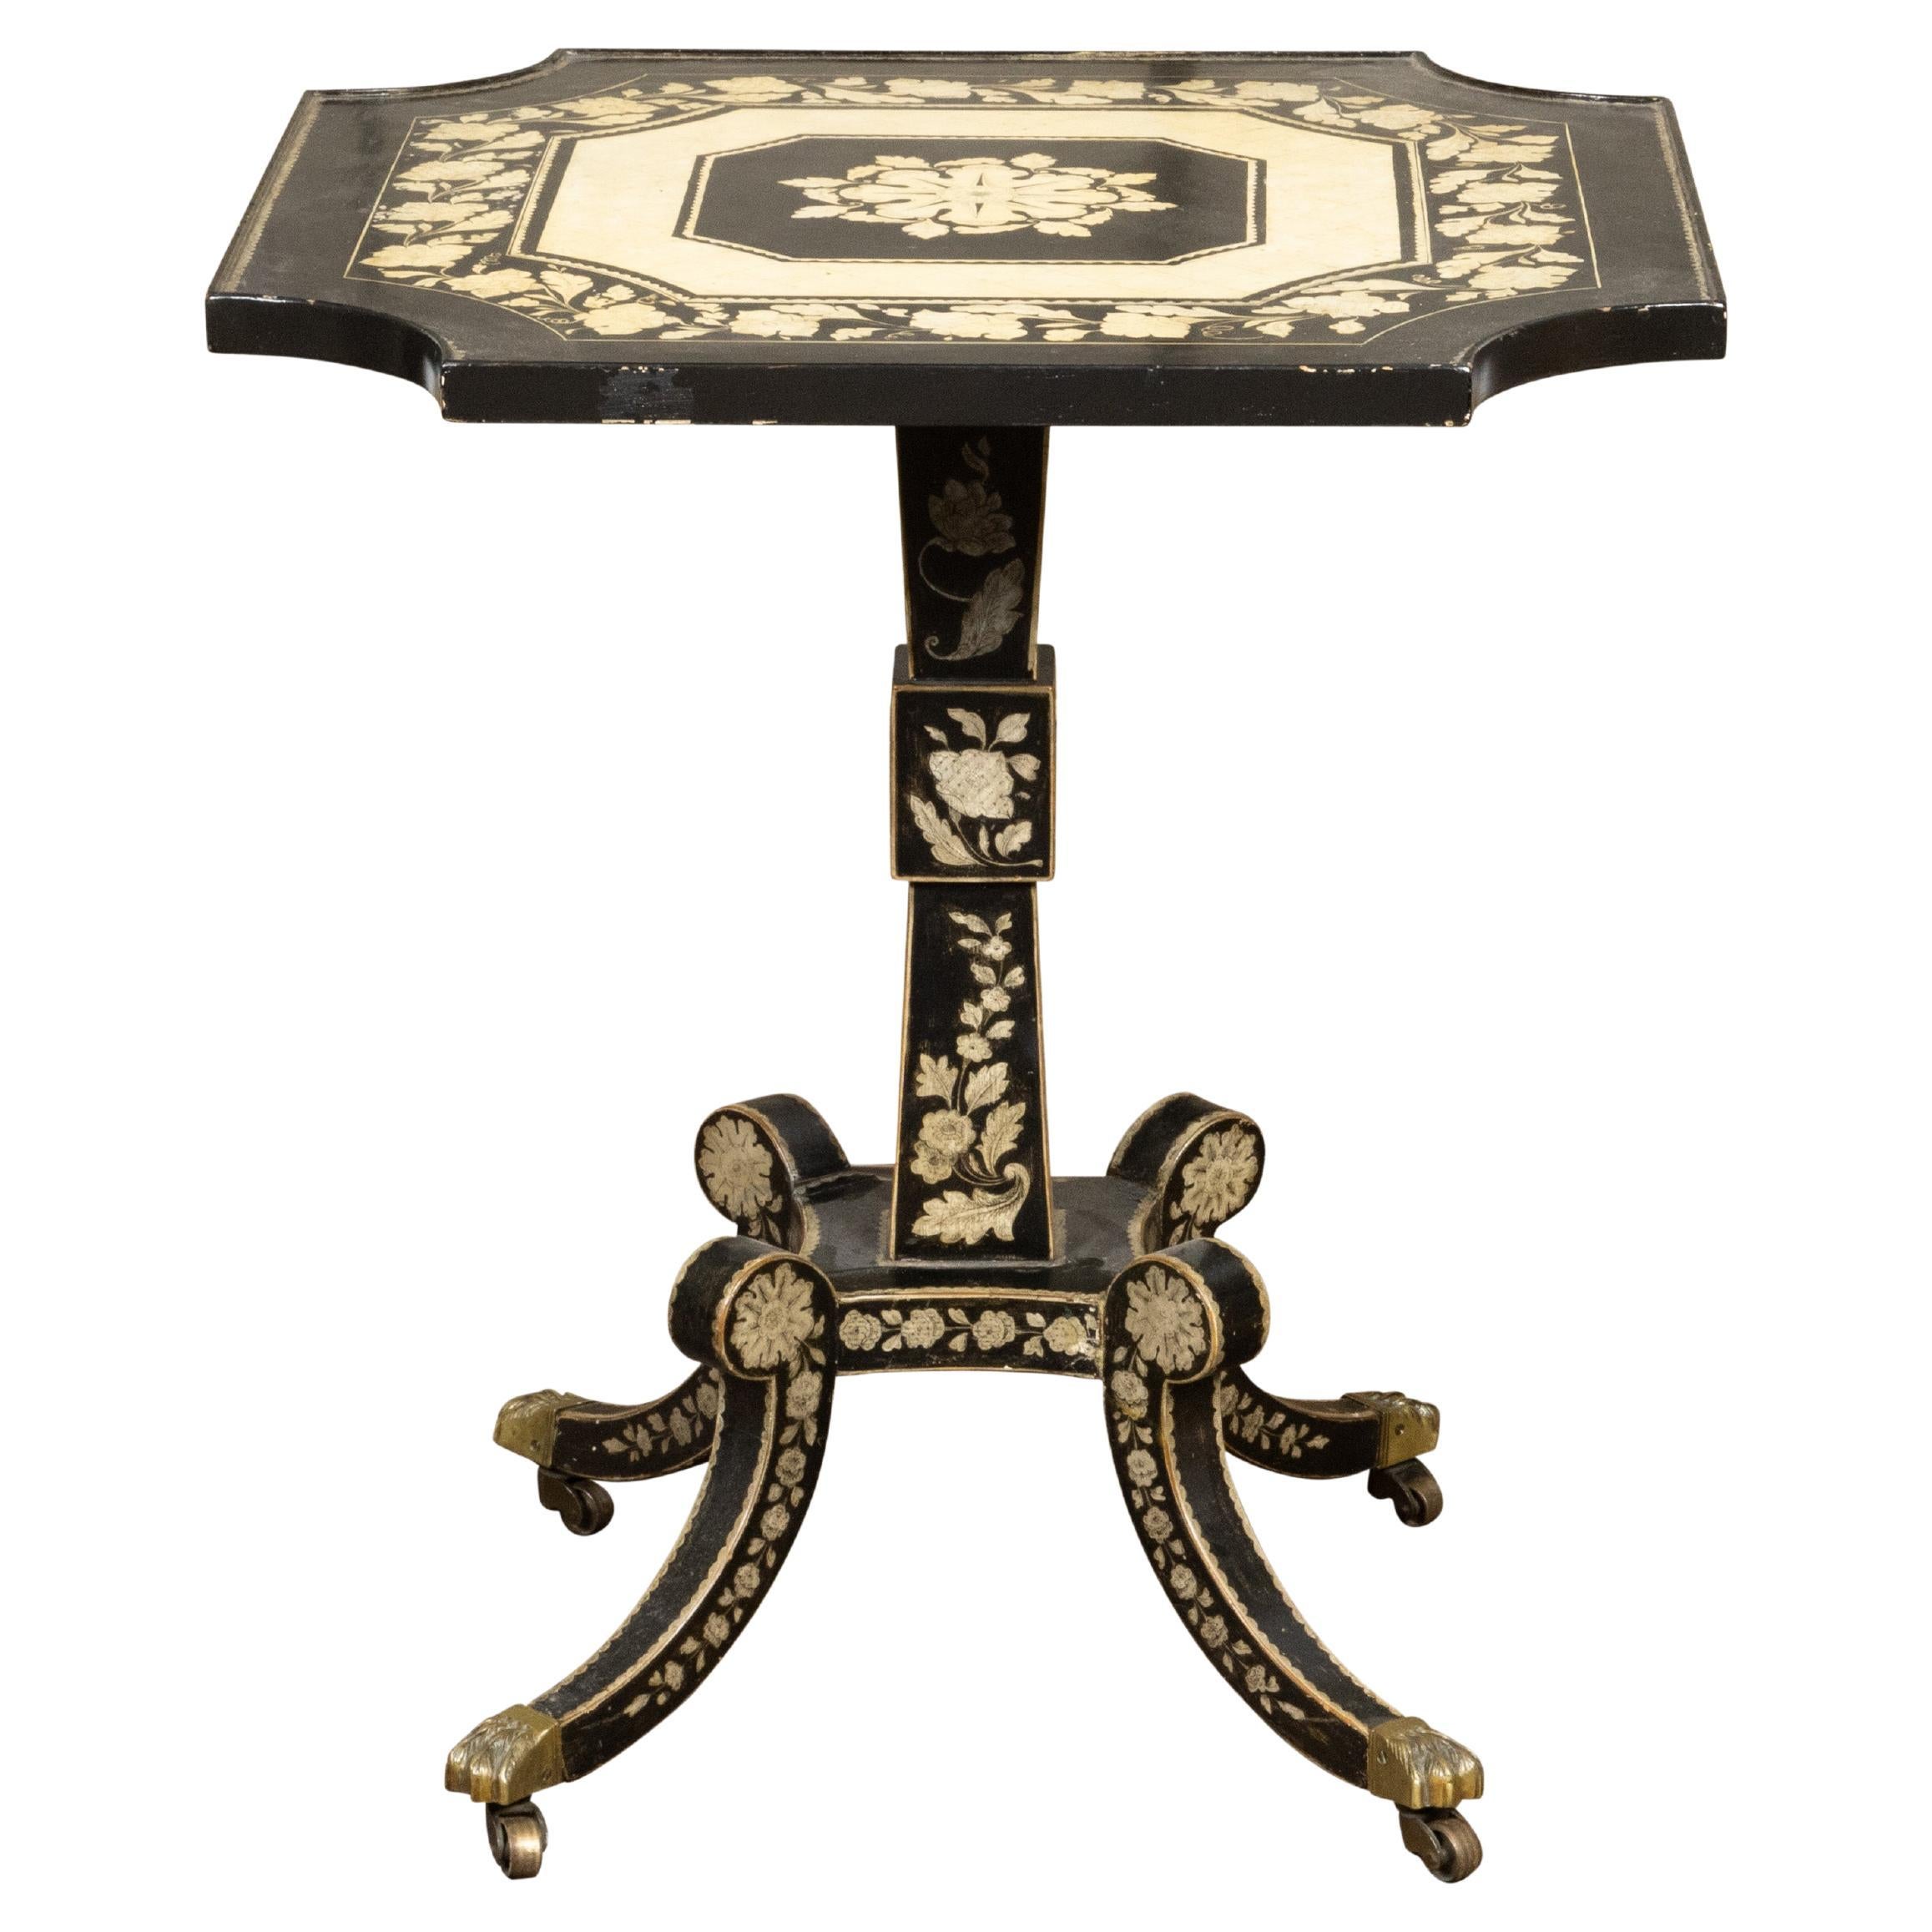 English Regency Penwork Occasional Table with Floral Décor and Curving Legs For Sale